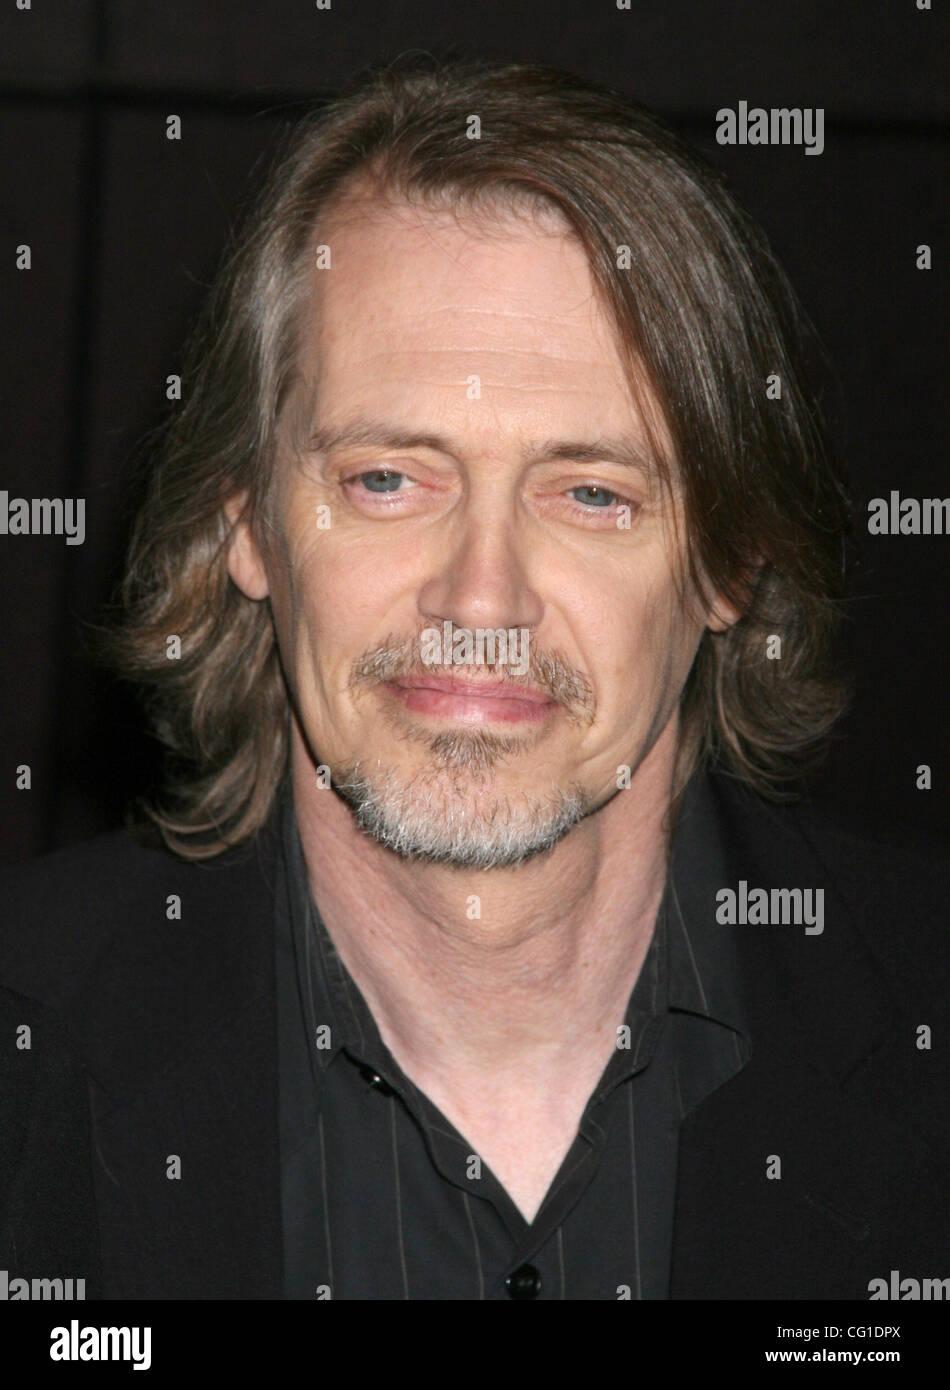 Aug 09, 2007 - New York, NY, USA - STEVE BUSCEMI  attends the New York Special screening of 'Delirious, which took place at the Tribeca Grand Hotel.  (Credit Image: © Dan Herrick/KPA-ZUMA/ZUMA Press) Stock Photo